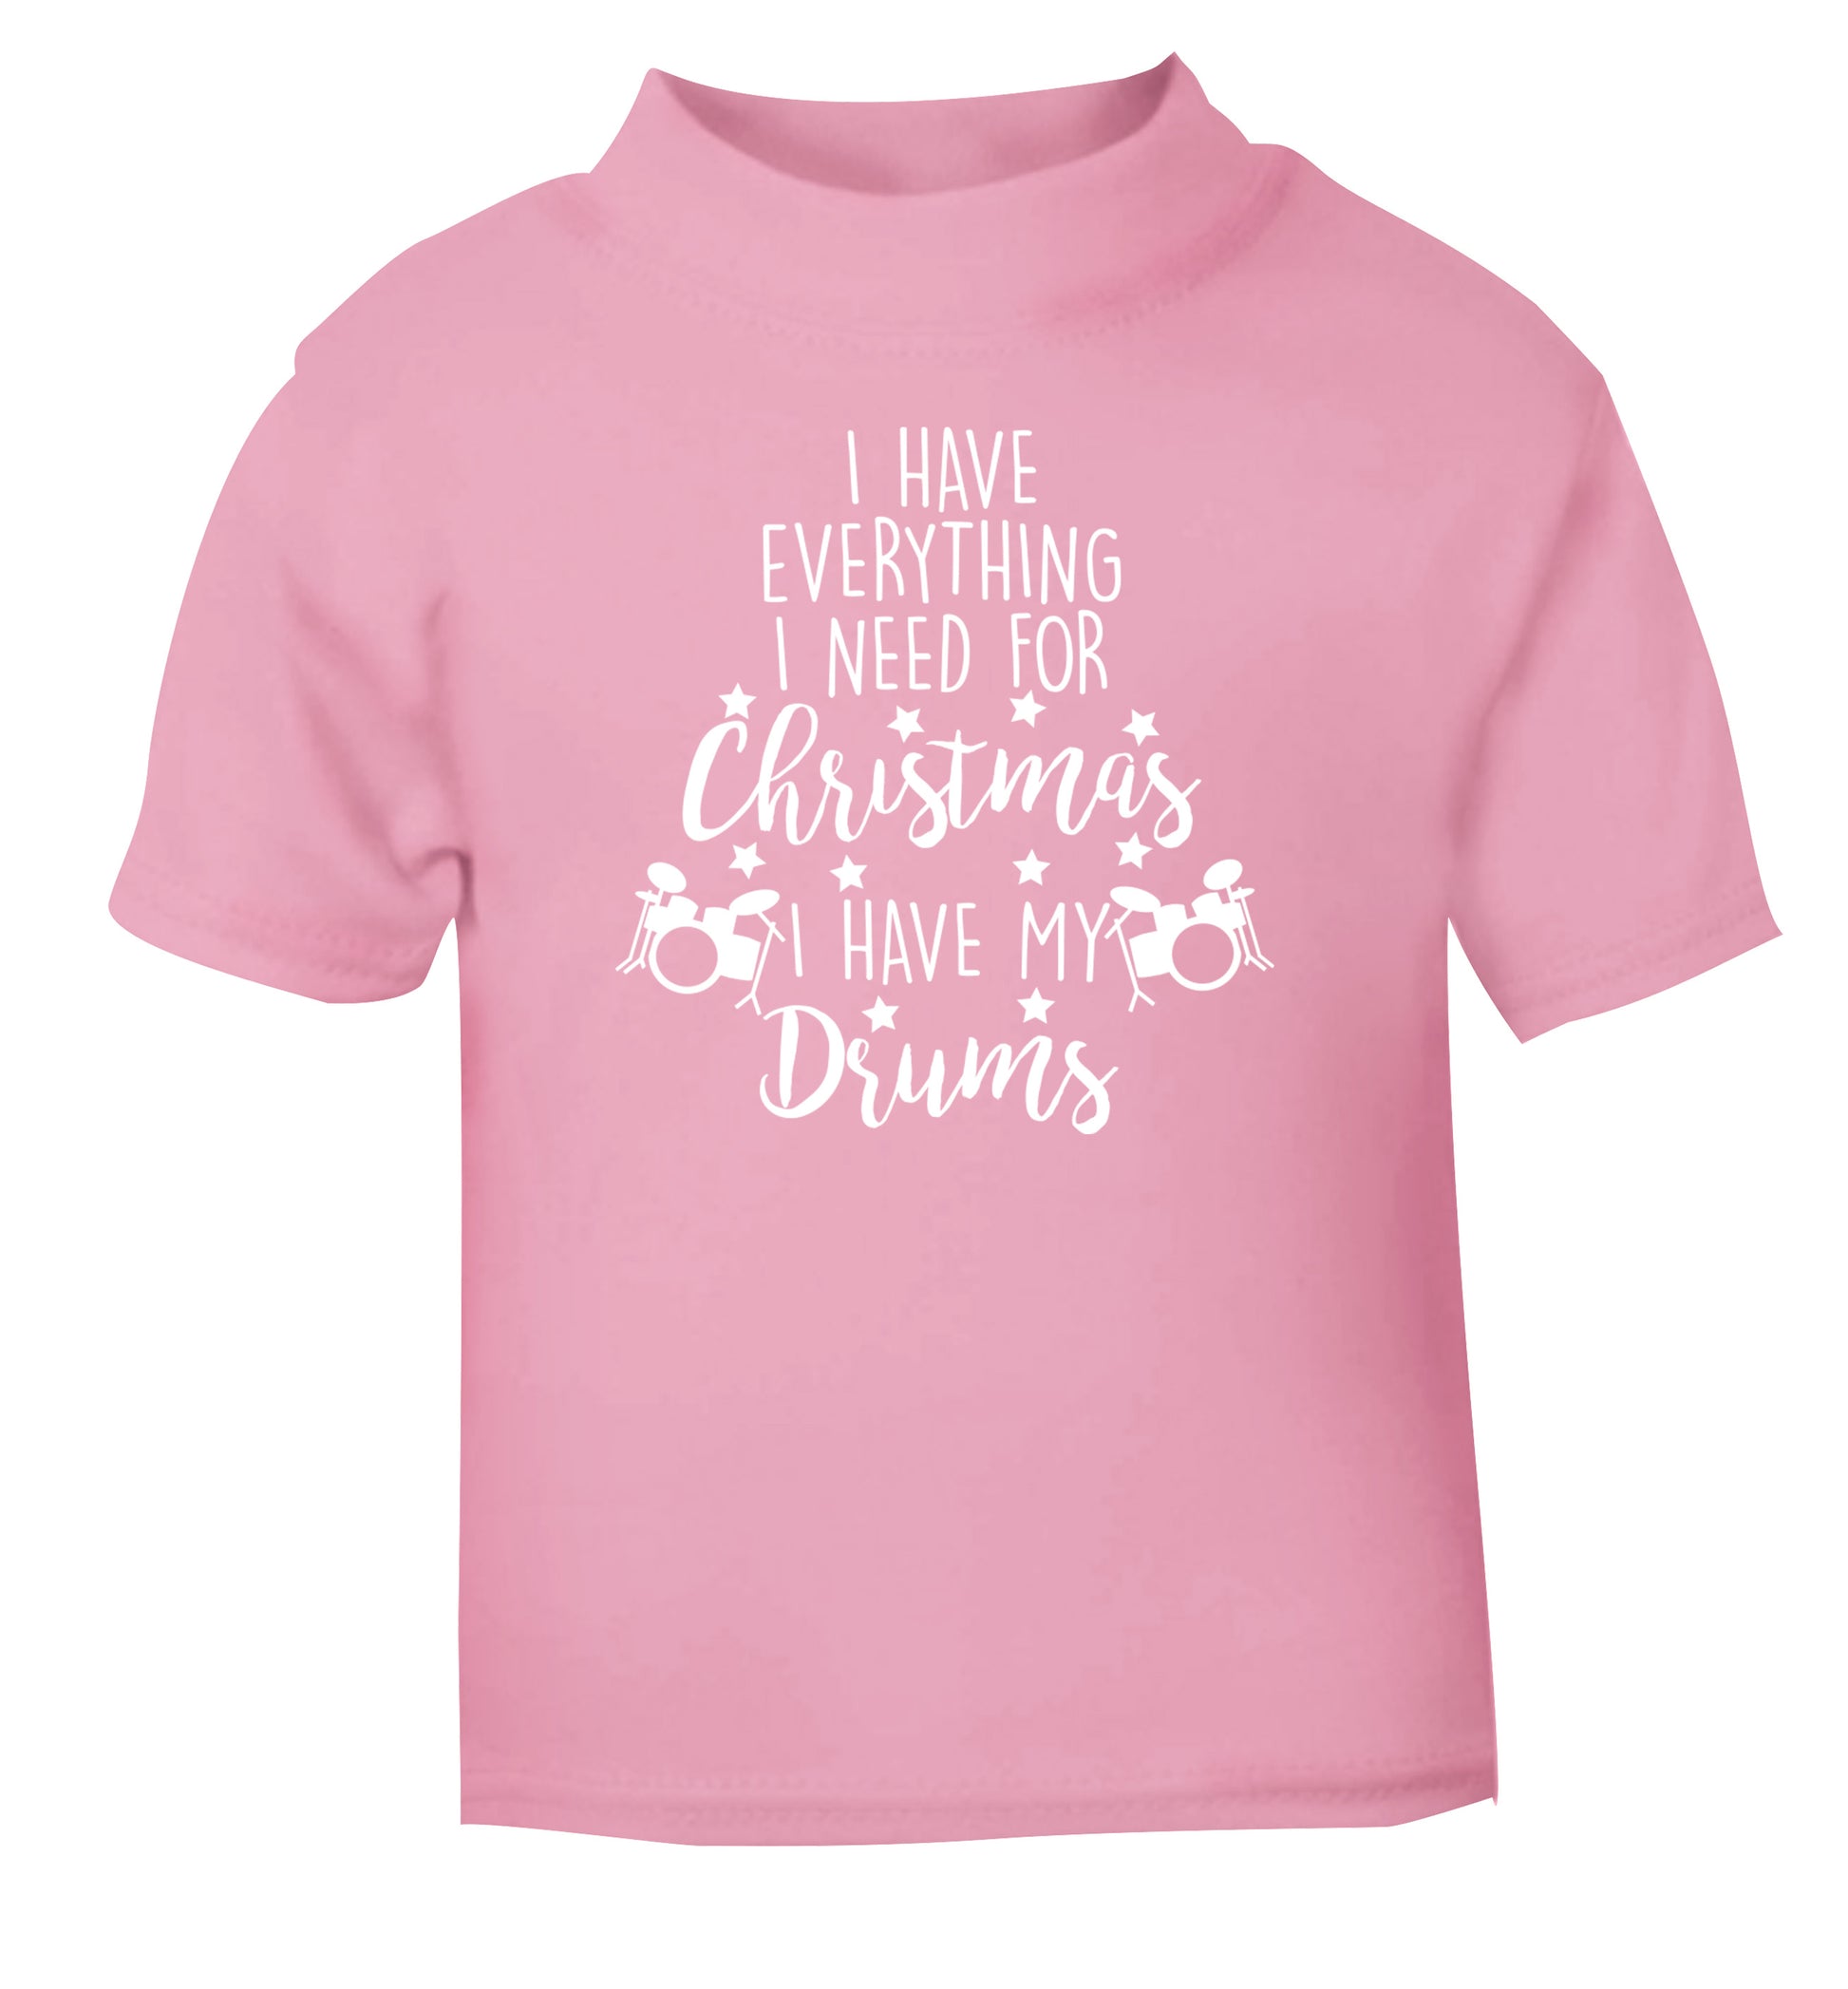 I have everything I need for Christmas I have my drums! light pink Baby Toddler Tshirt 2 Years